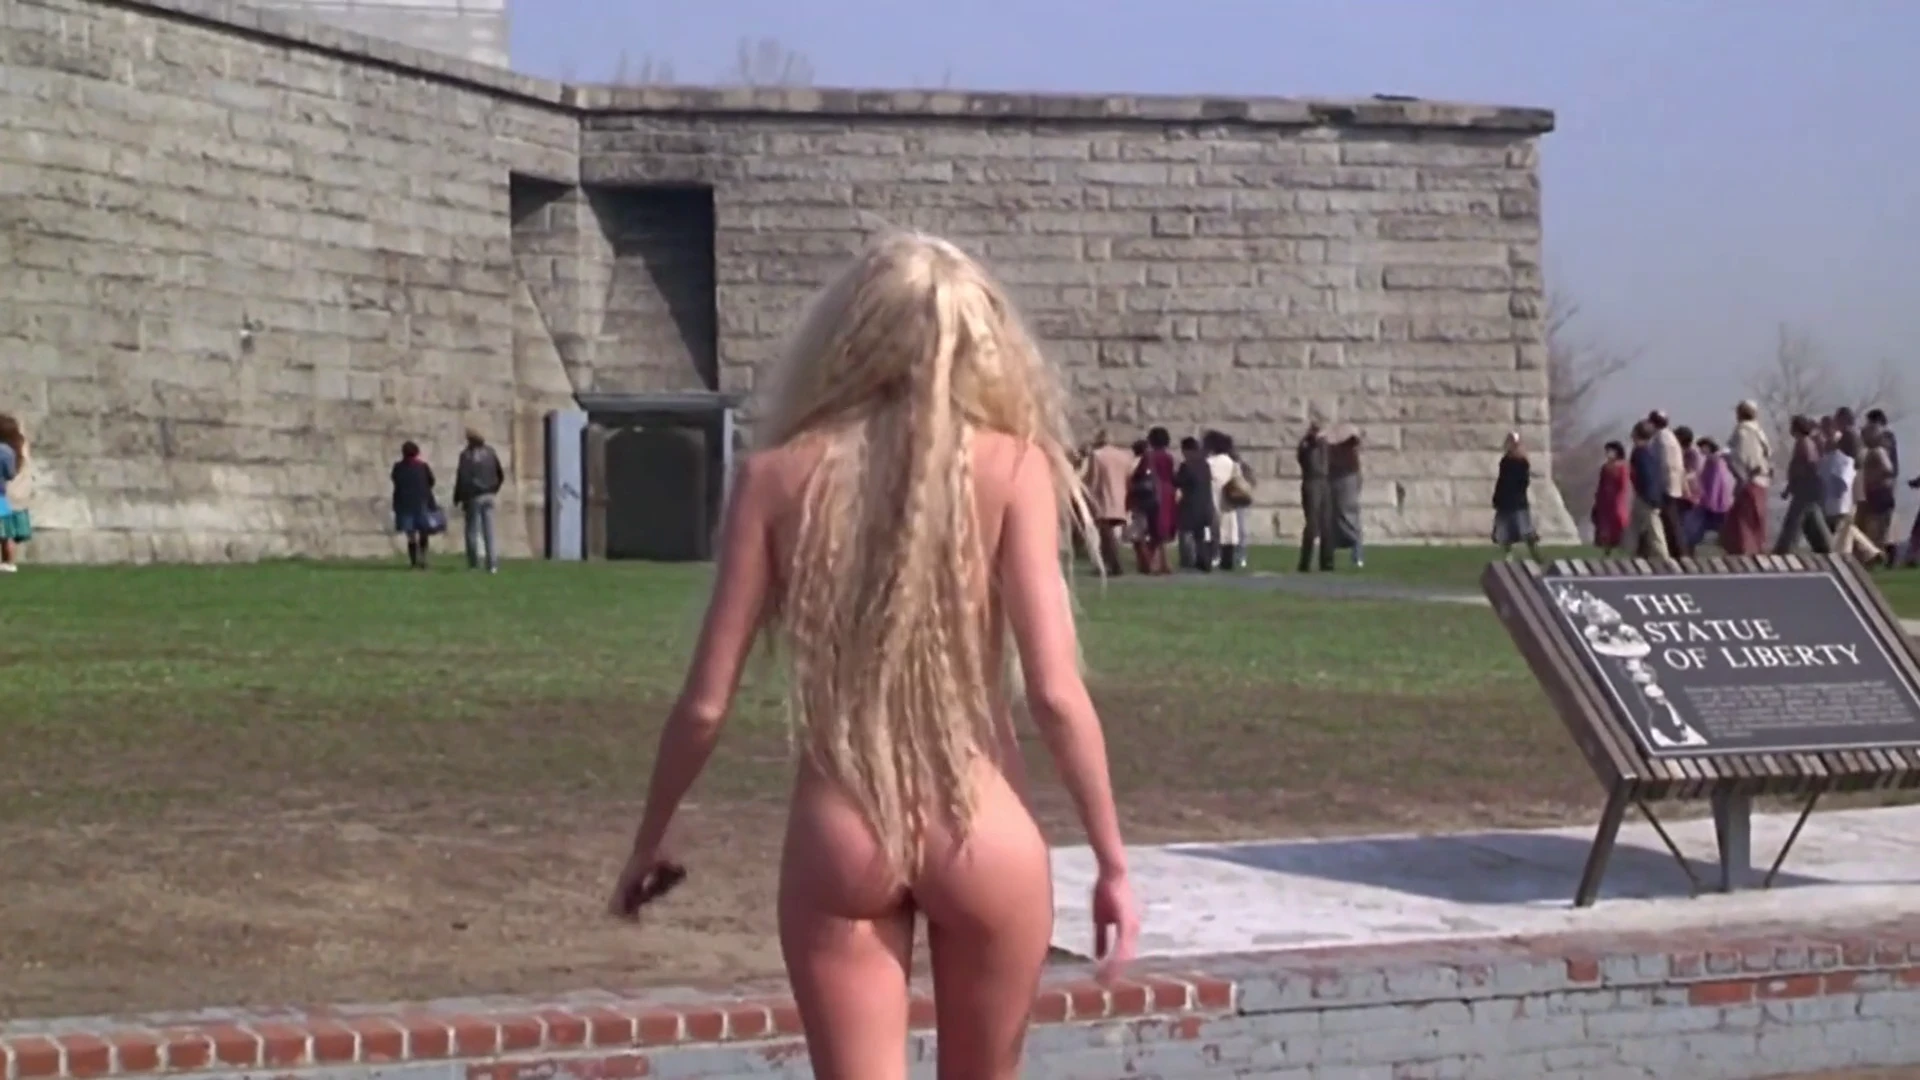 Splash (1984), PG, Daryl Hannah (beautiful full ass and some boob slips). If anyone is interested, I have this sub that focuses on female nudity in PG and PG-13 movies